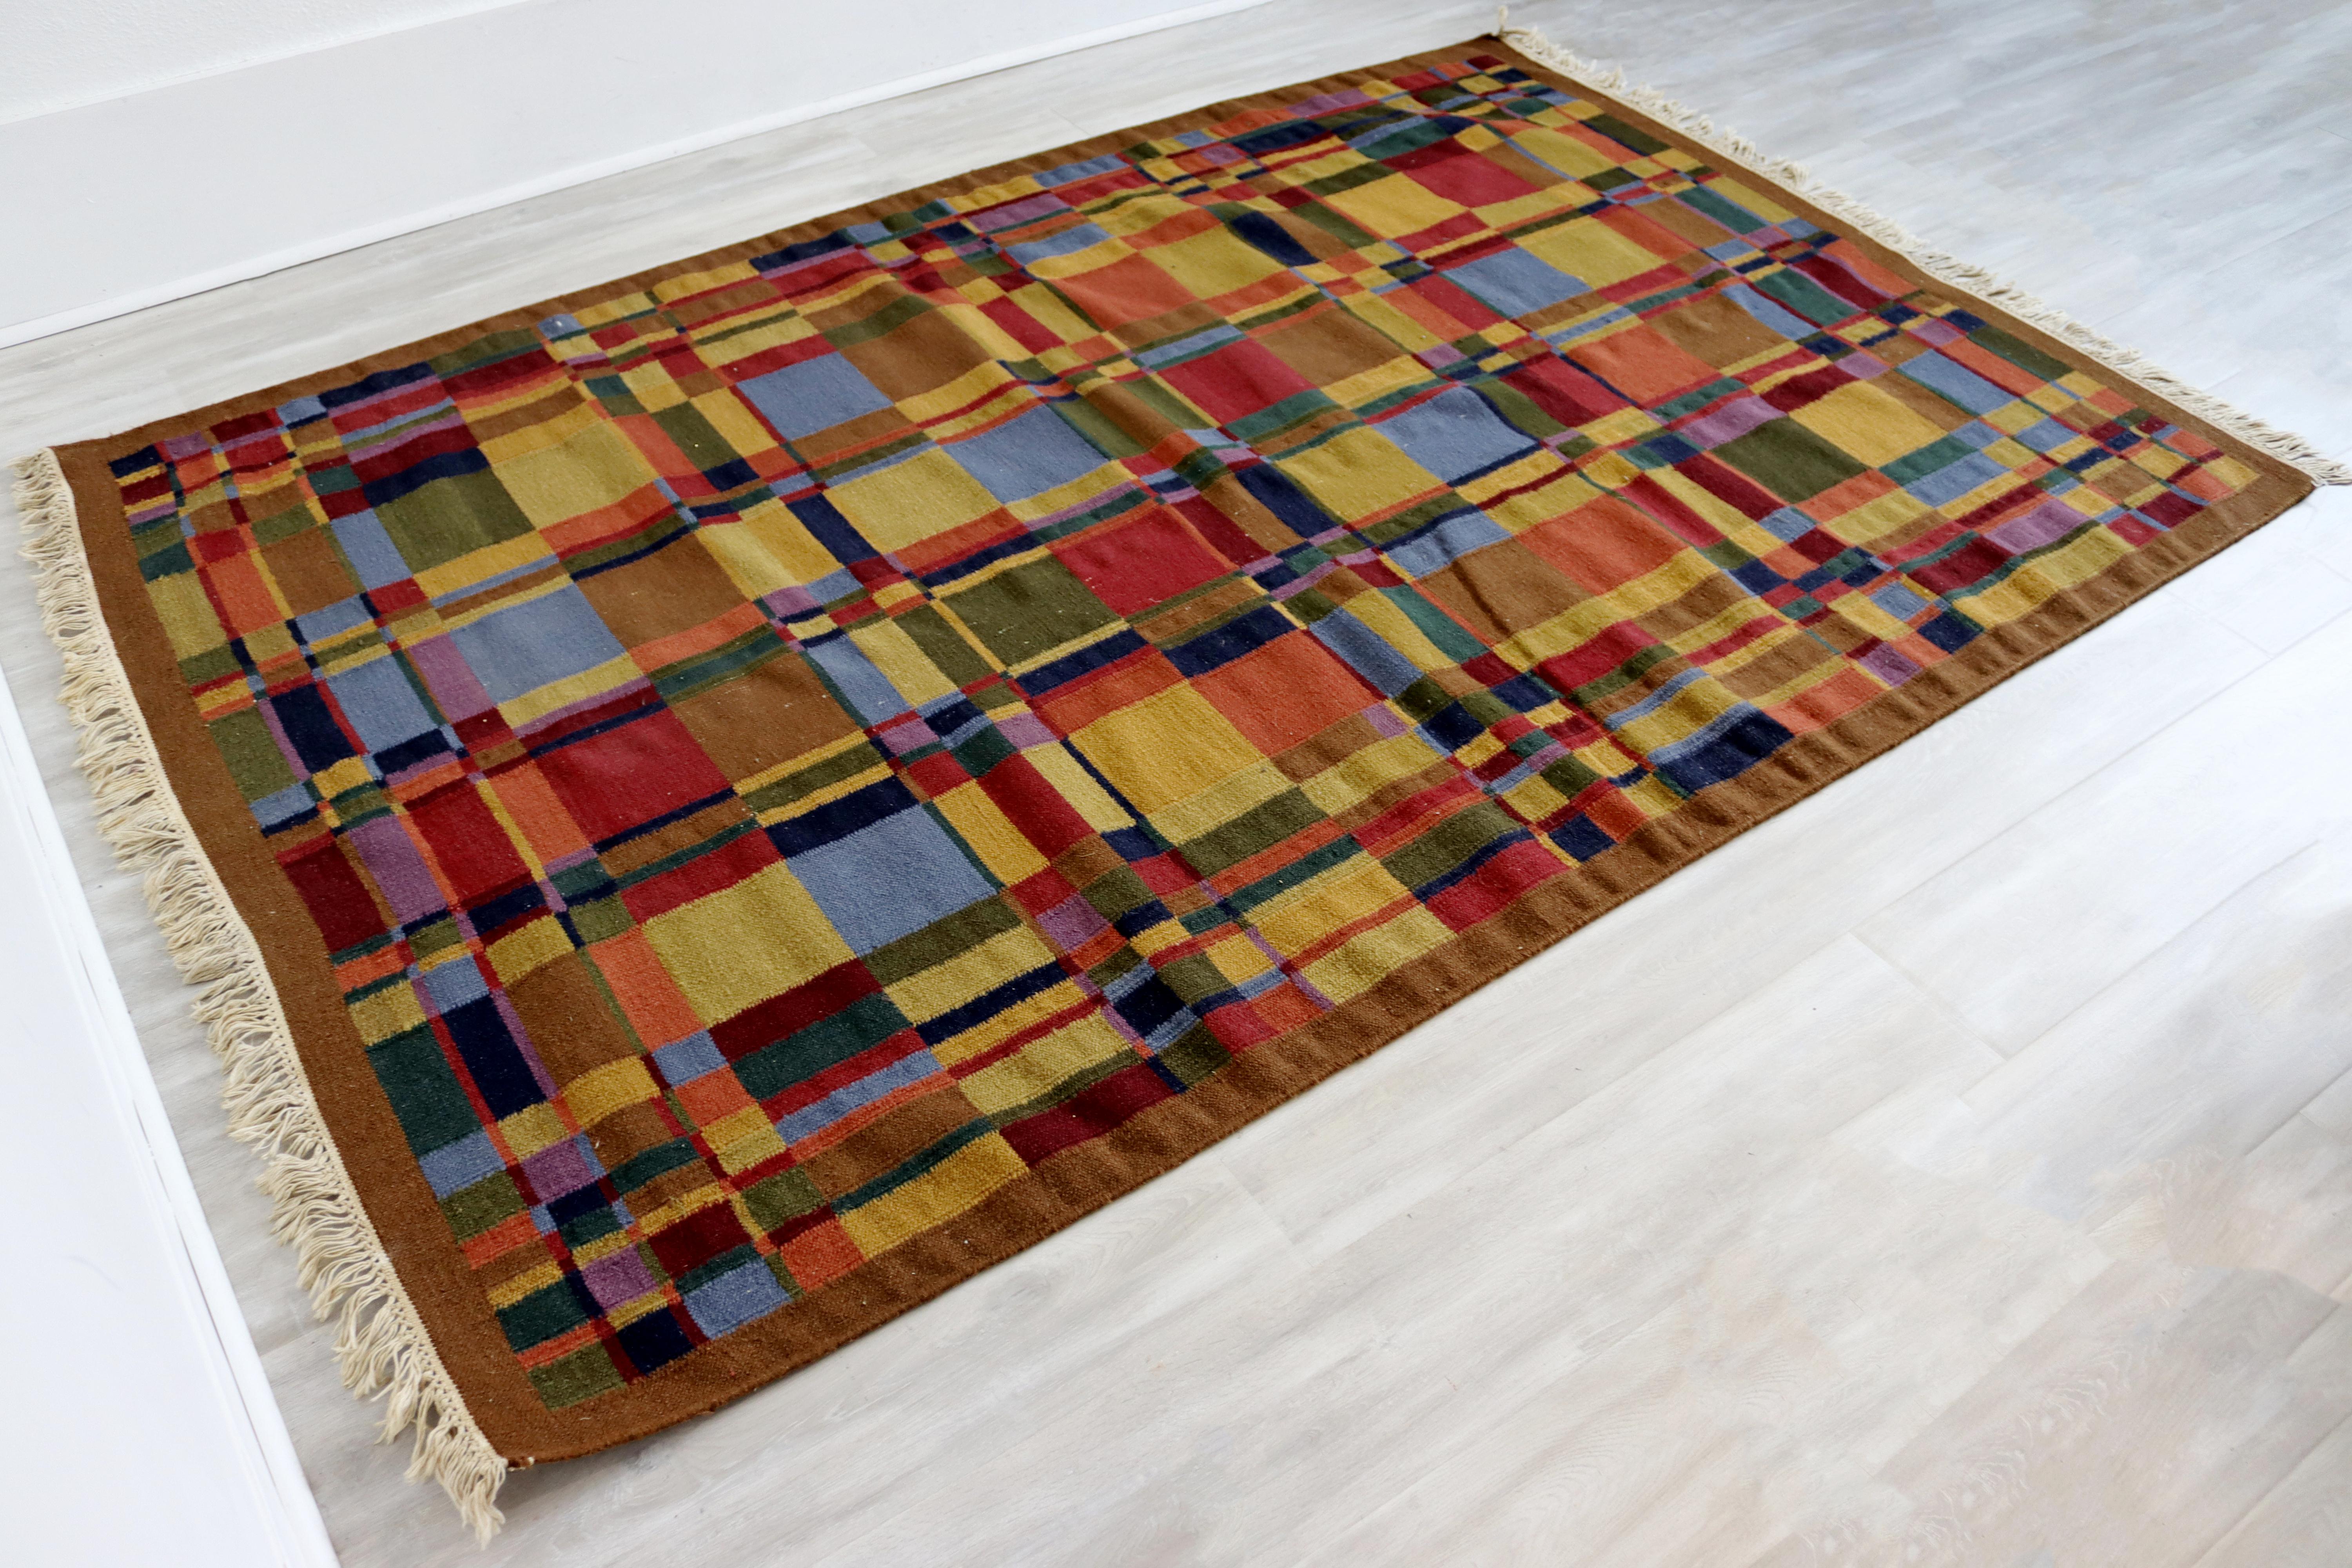 For your consideration is a wonderful, multi-colored, flat weave wool, rectangular area rug, made in Sweden, circa the 1960s. In very good vintage condition. The dimensions are 92